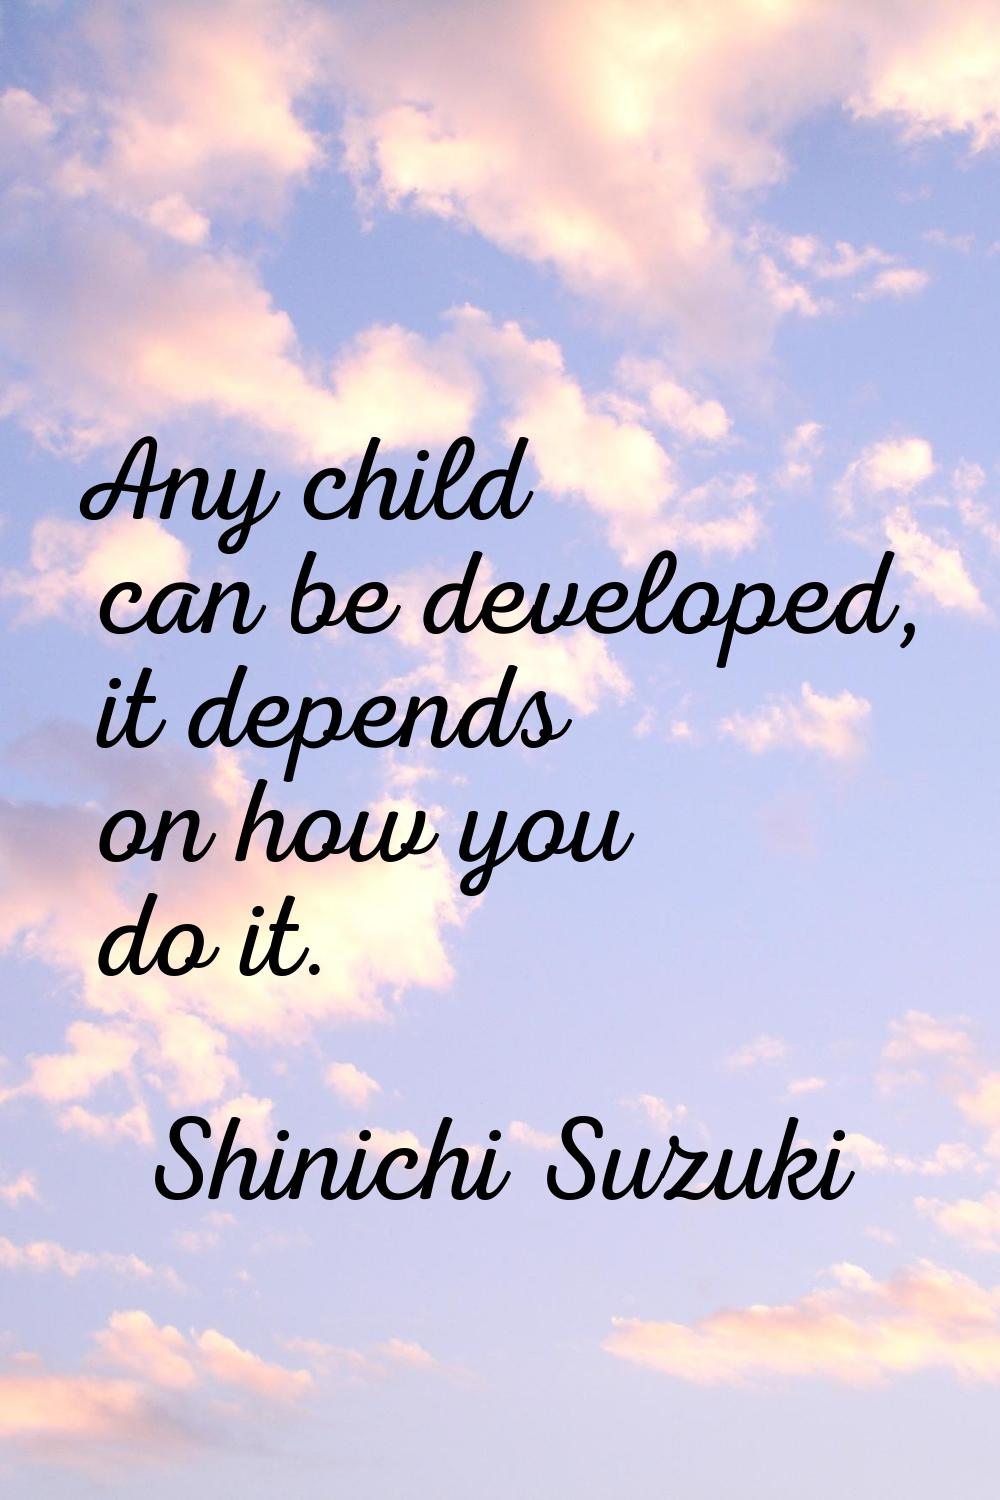 Any child can be developed, it depends on how you do it.